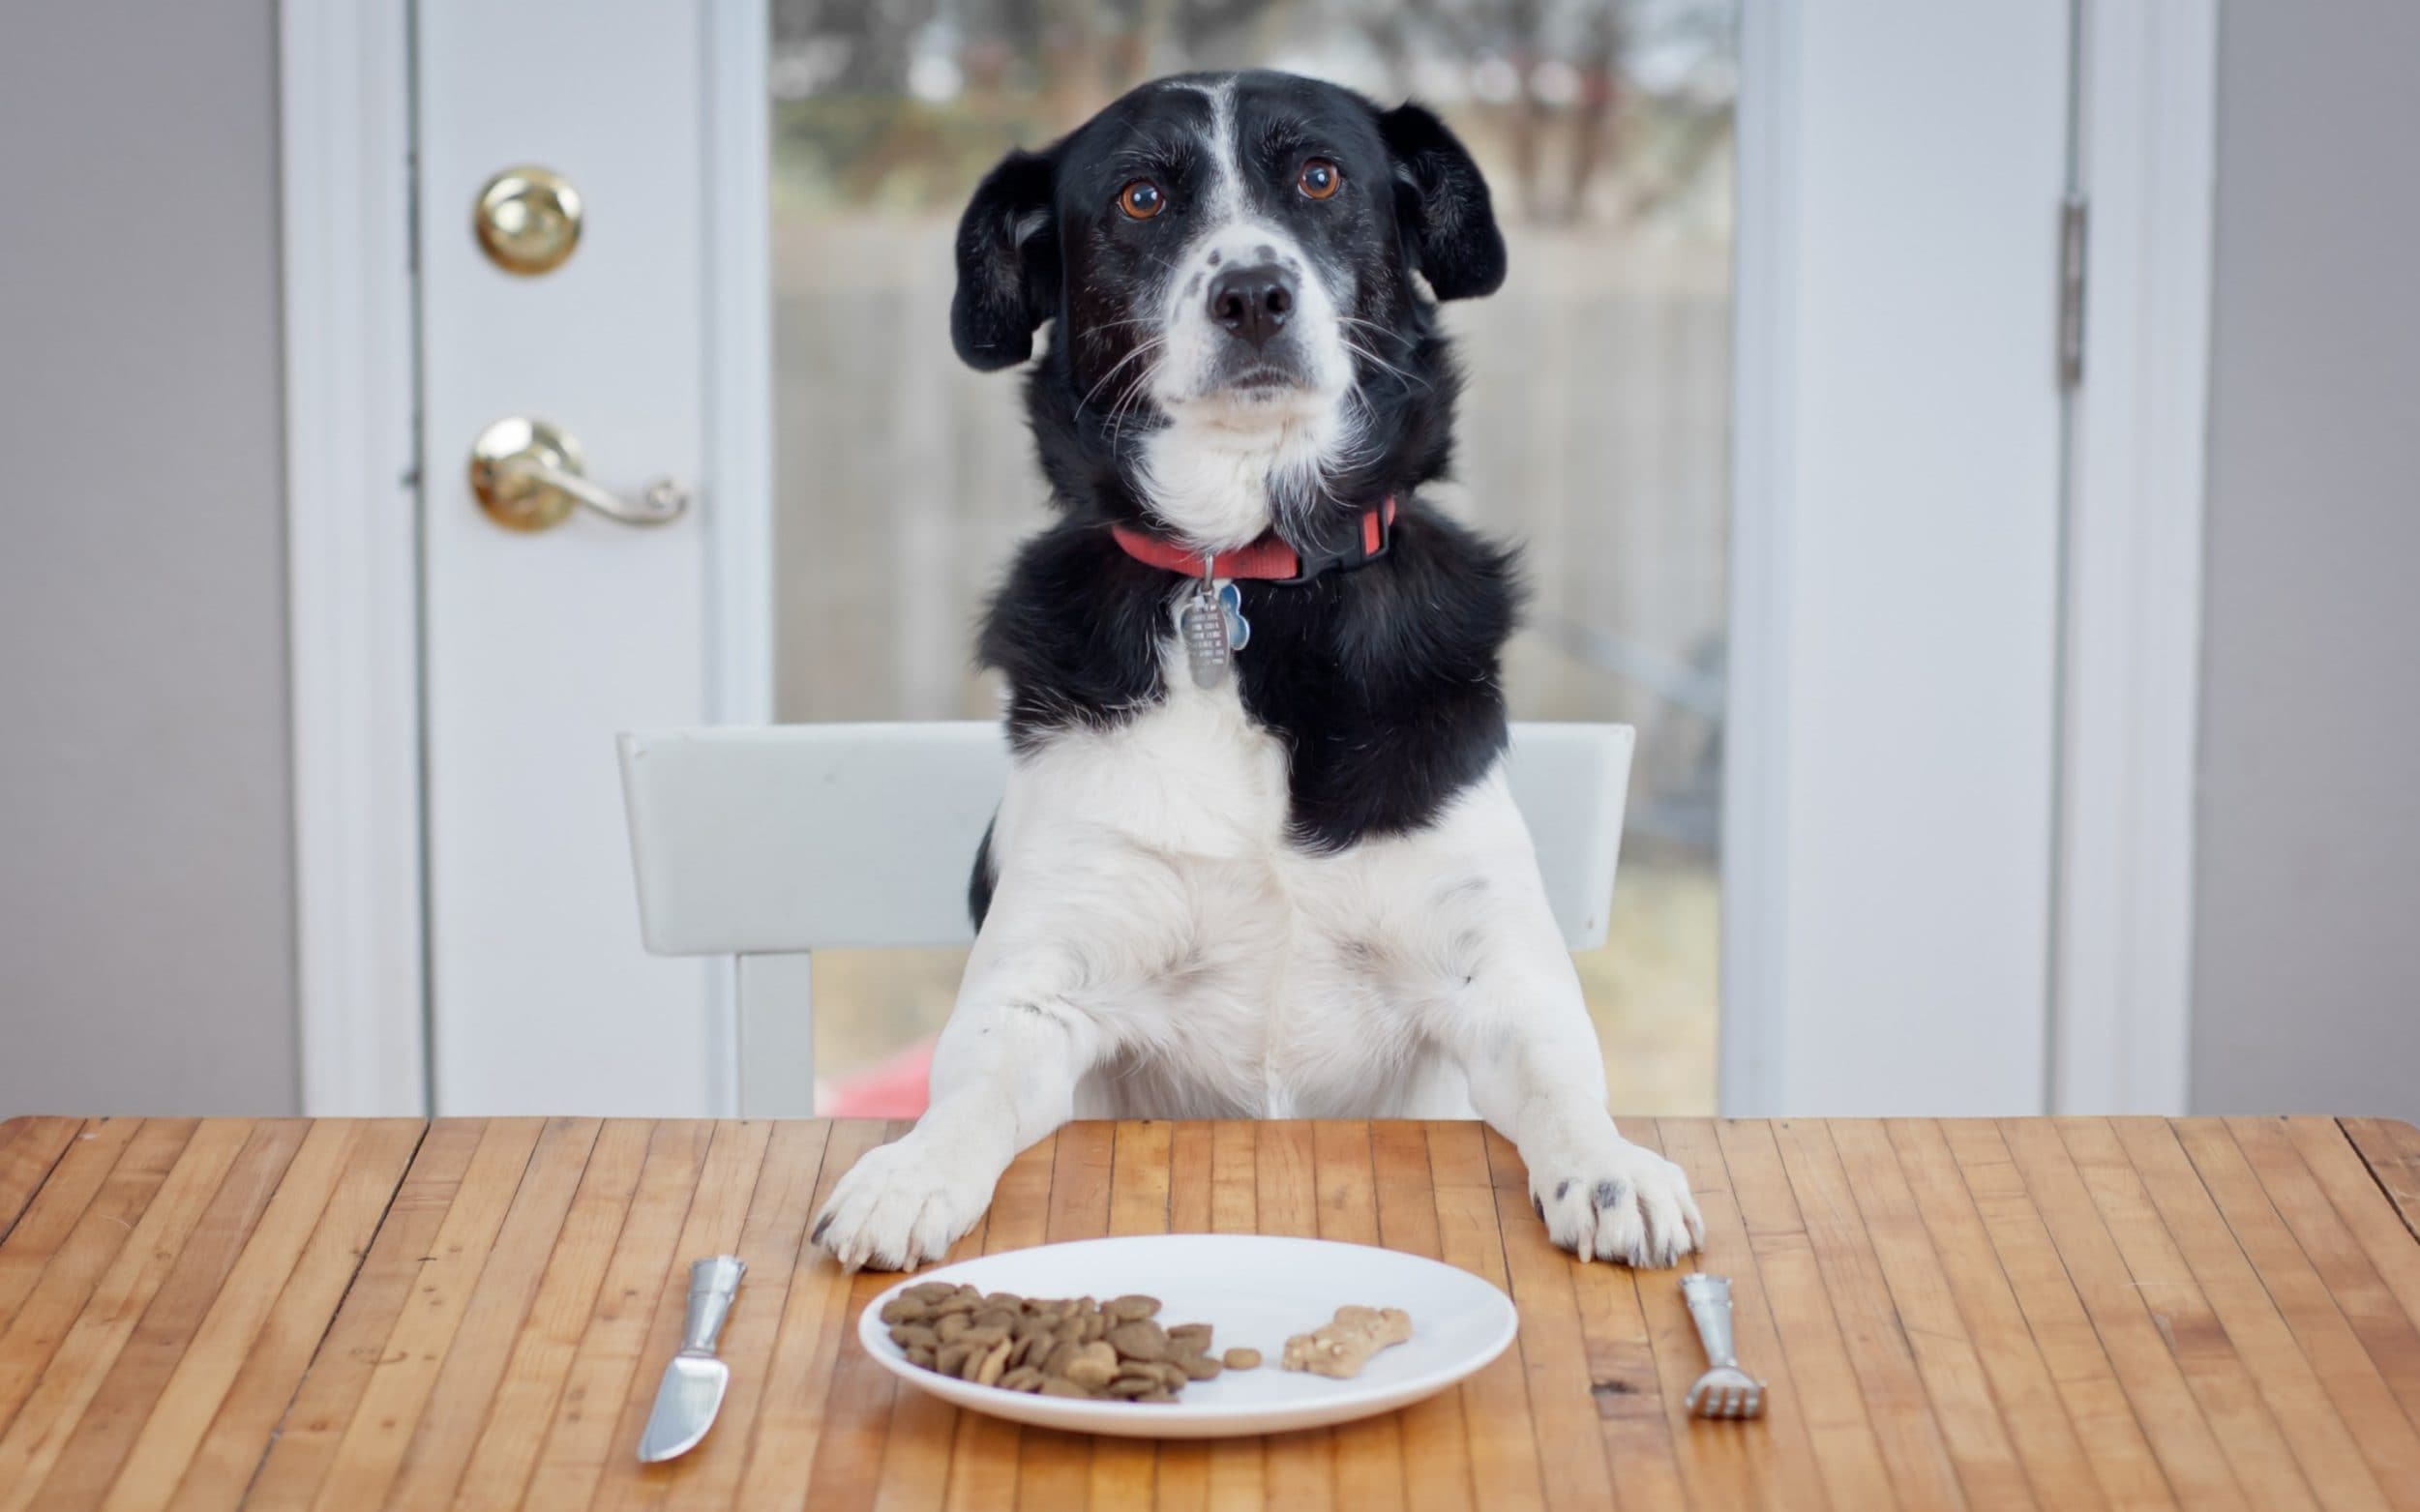 How to Choose the Right Food For Your Dog